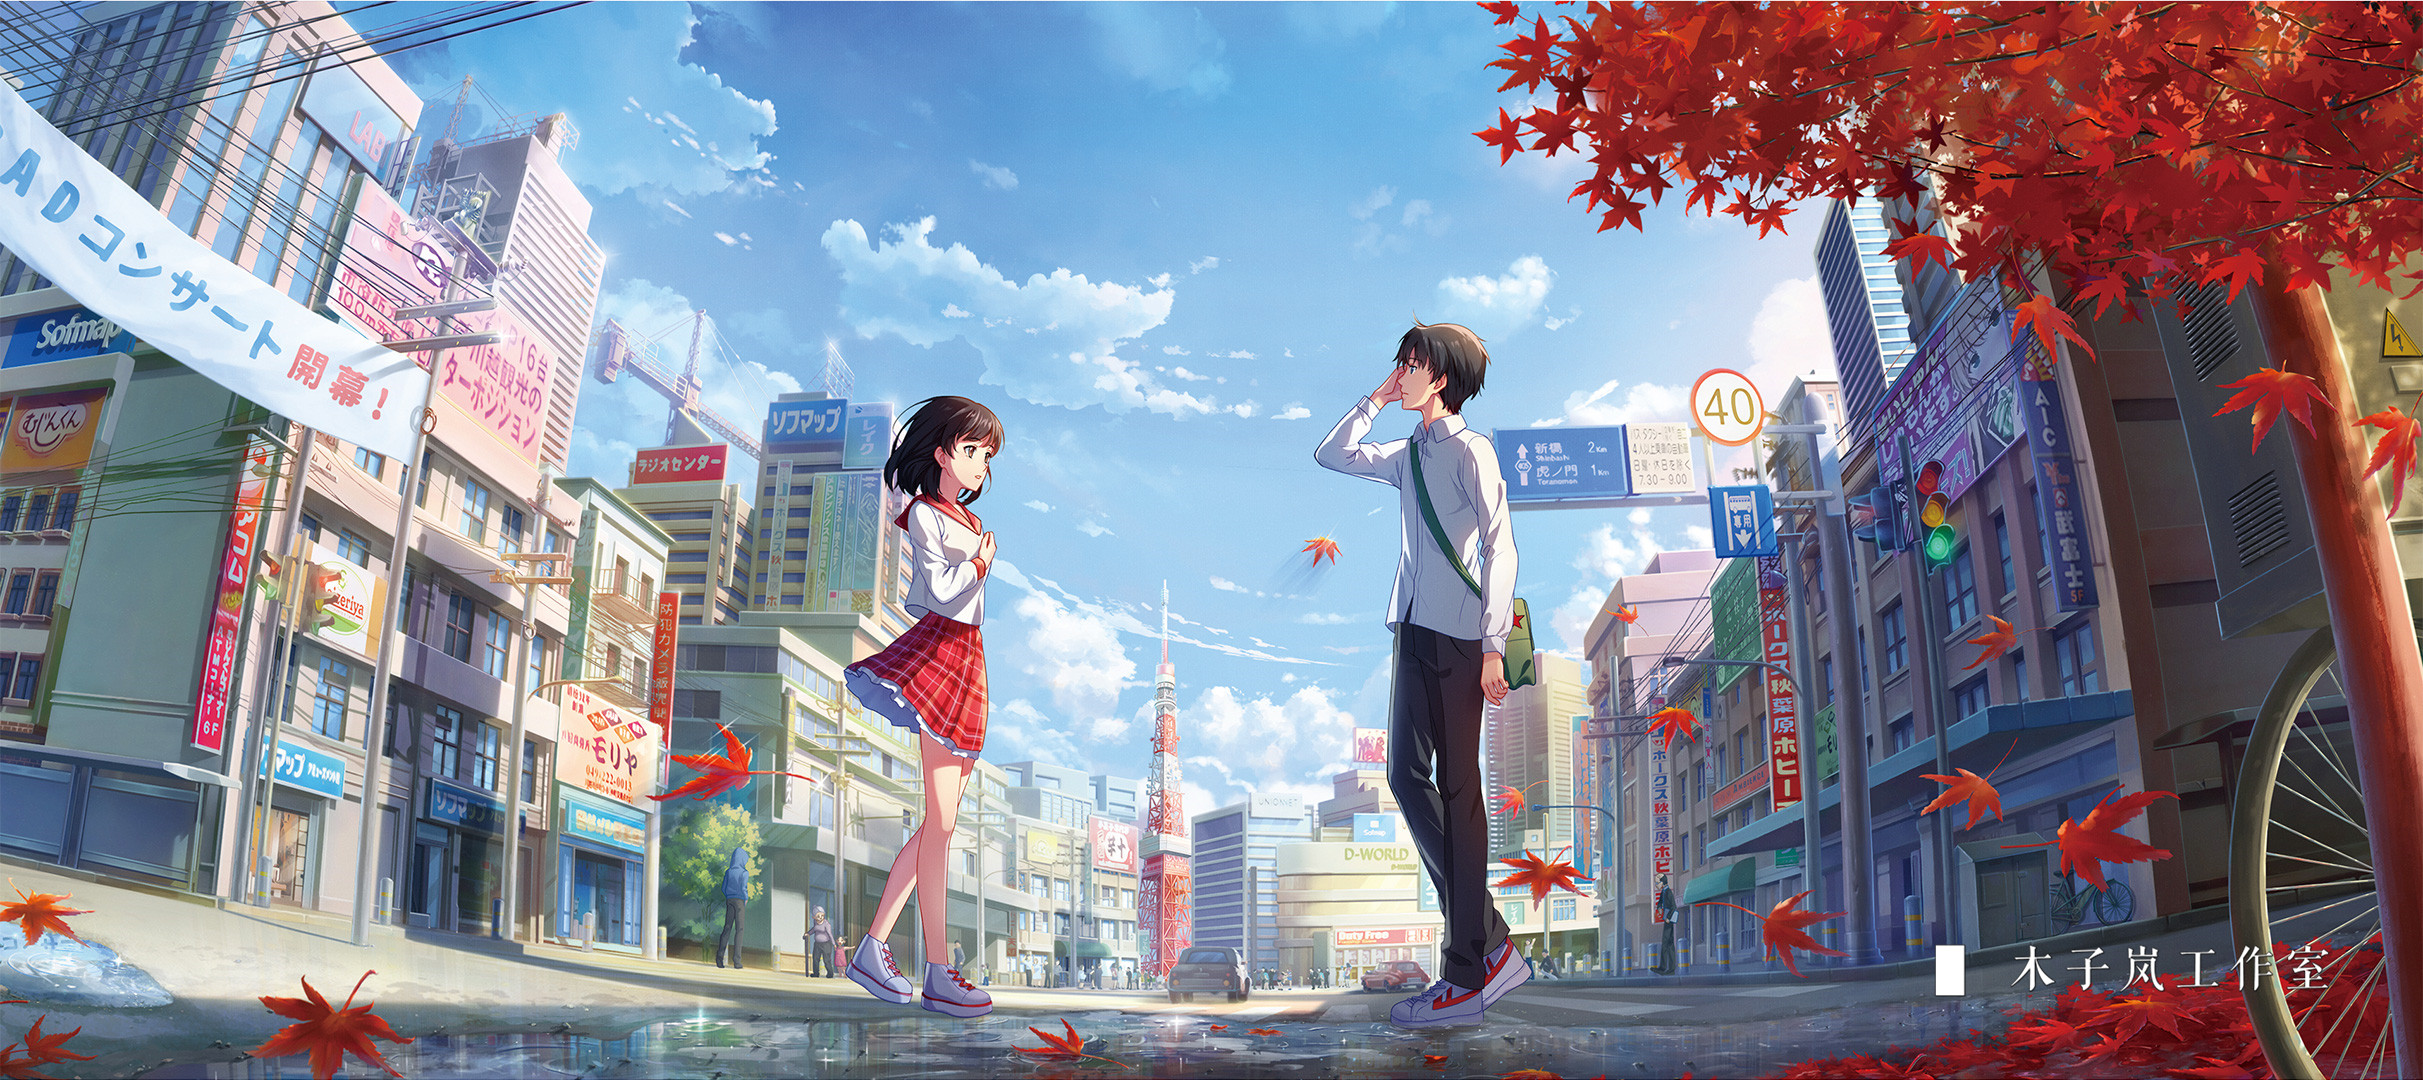 Windows Backgrounds anime, couple, black hair, city, sneakers